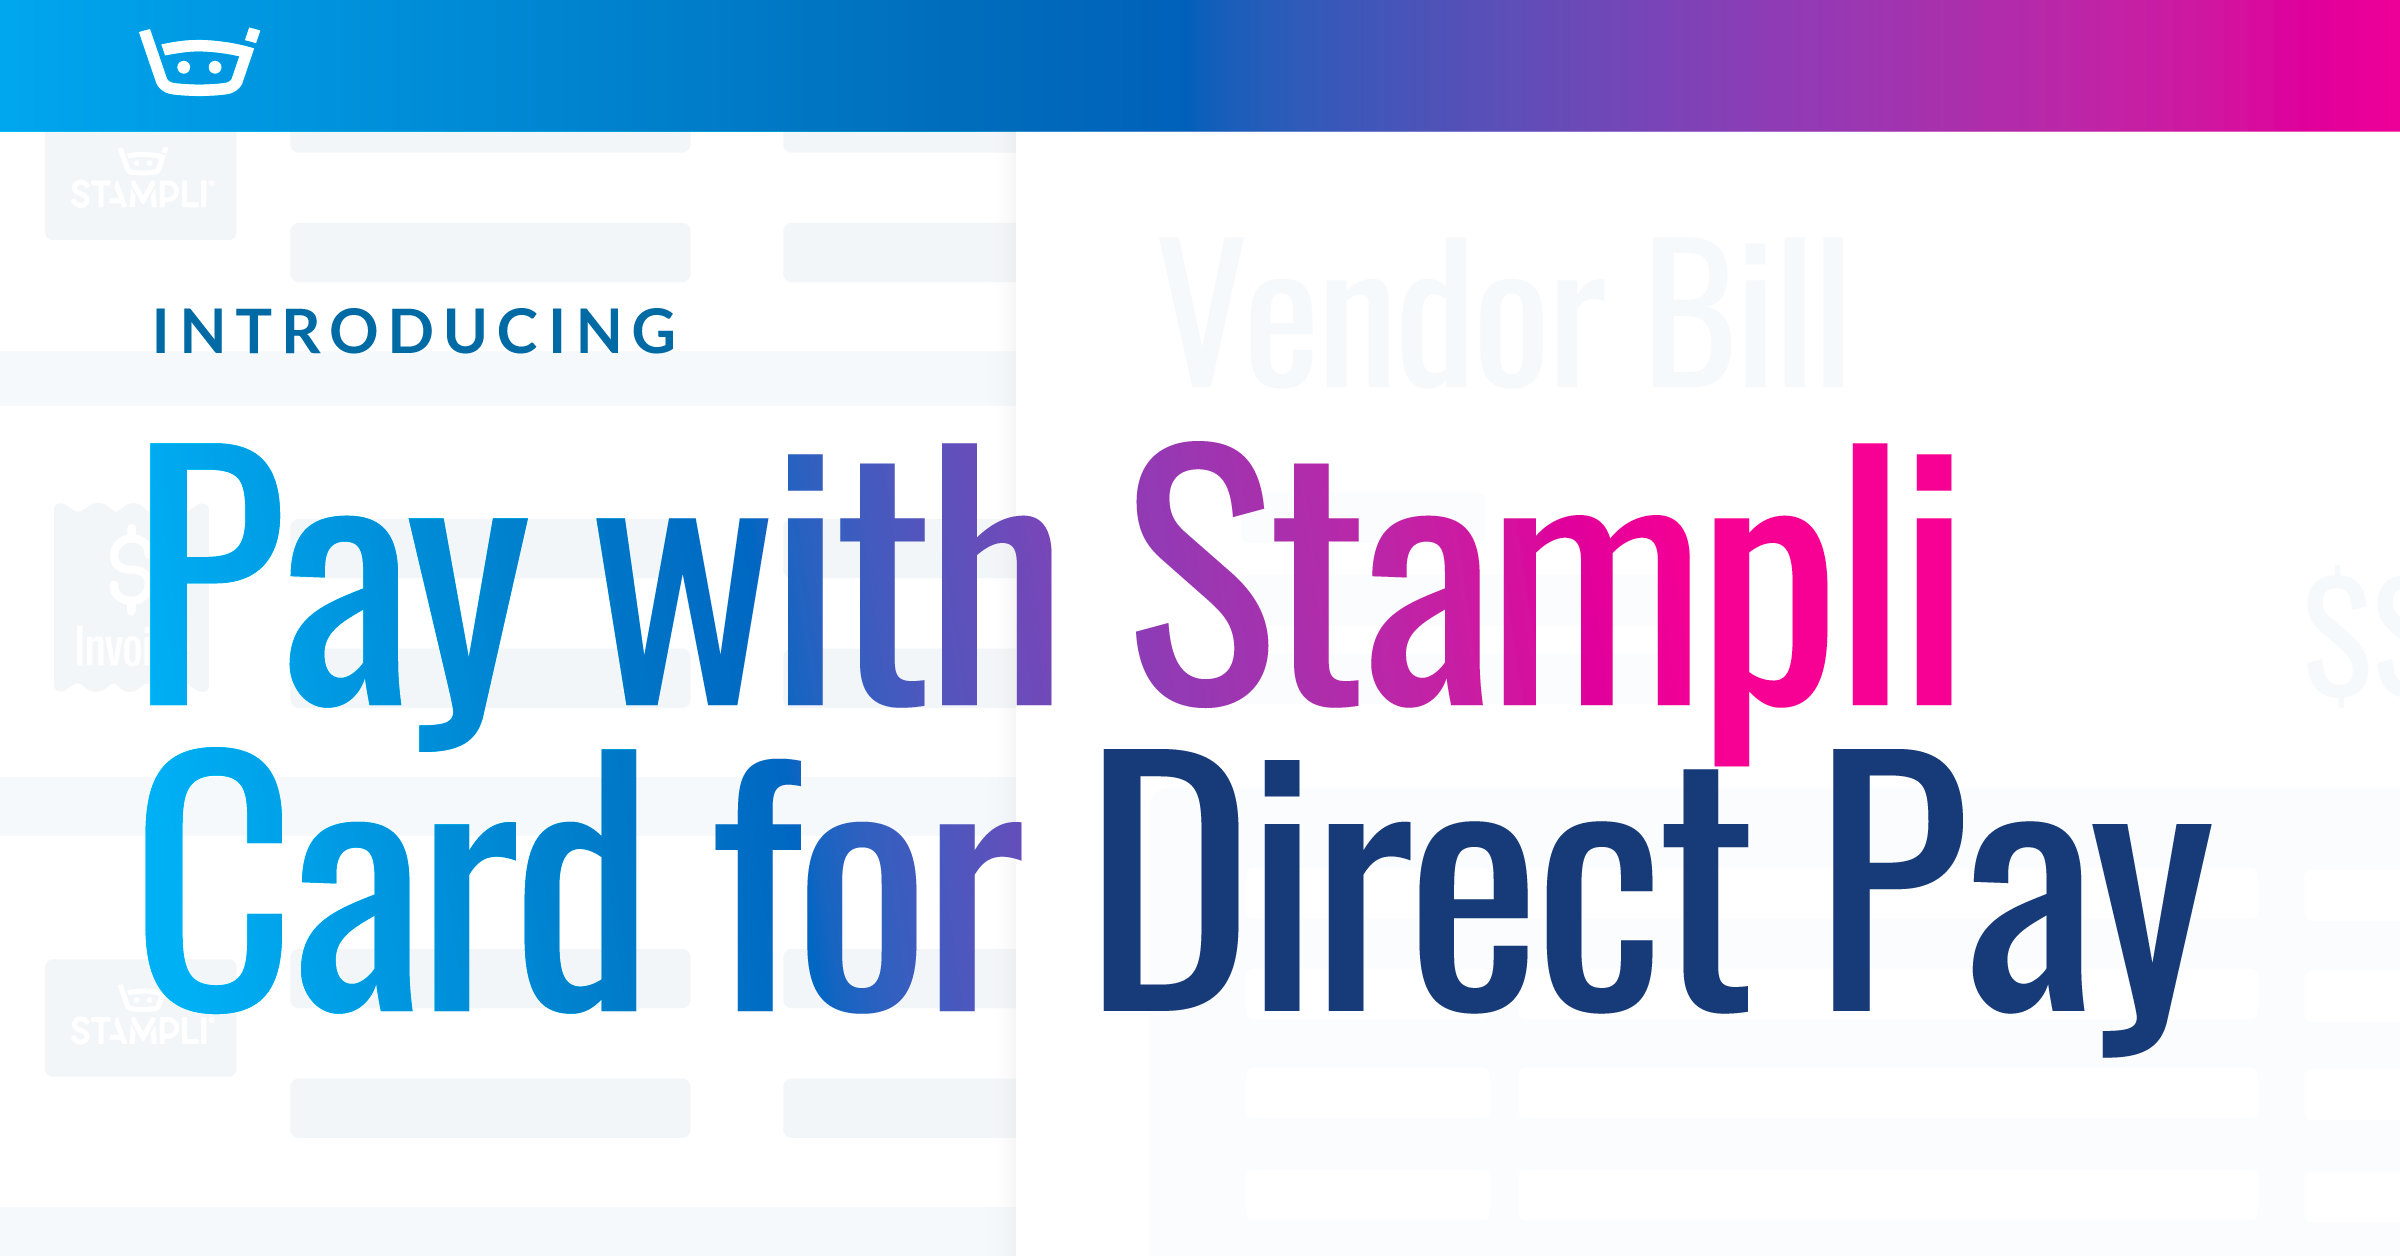 Introducing Stampli Card for Stampli Direct Pay